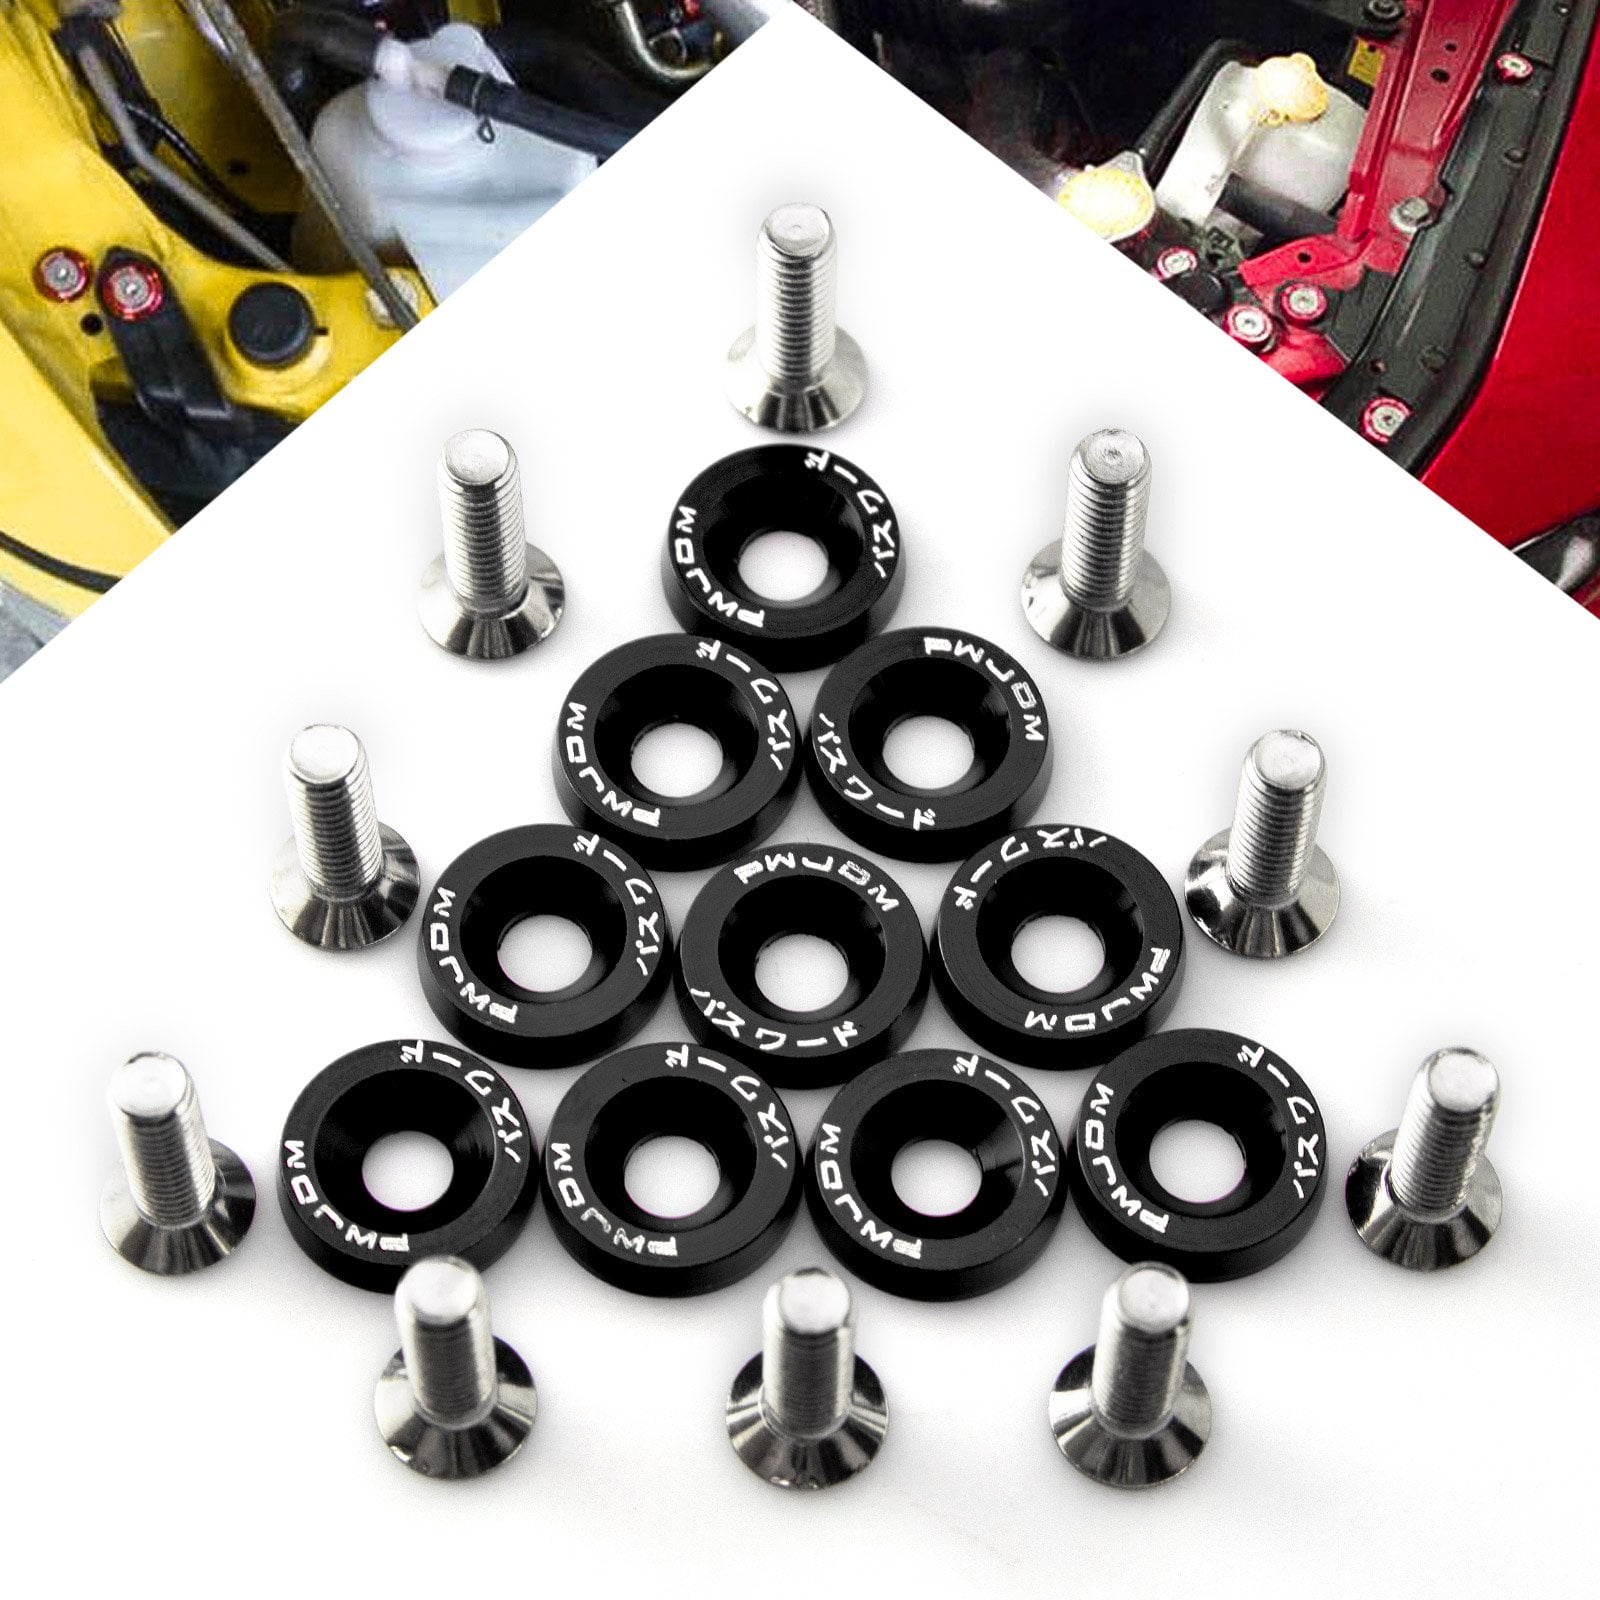 iJDMTOY 4 JDM Racing Style Silver Aluminum Washers Bolts Kit for Car License Plate Frame, Fender, Bumper, Engine Bay, etc 